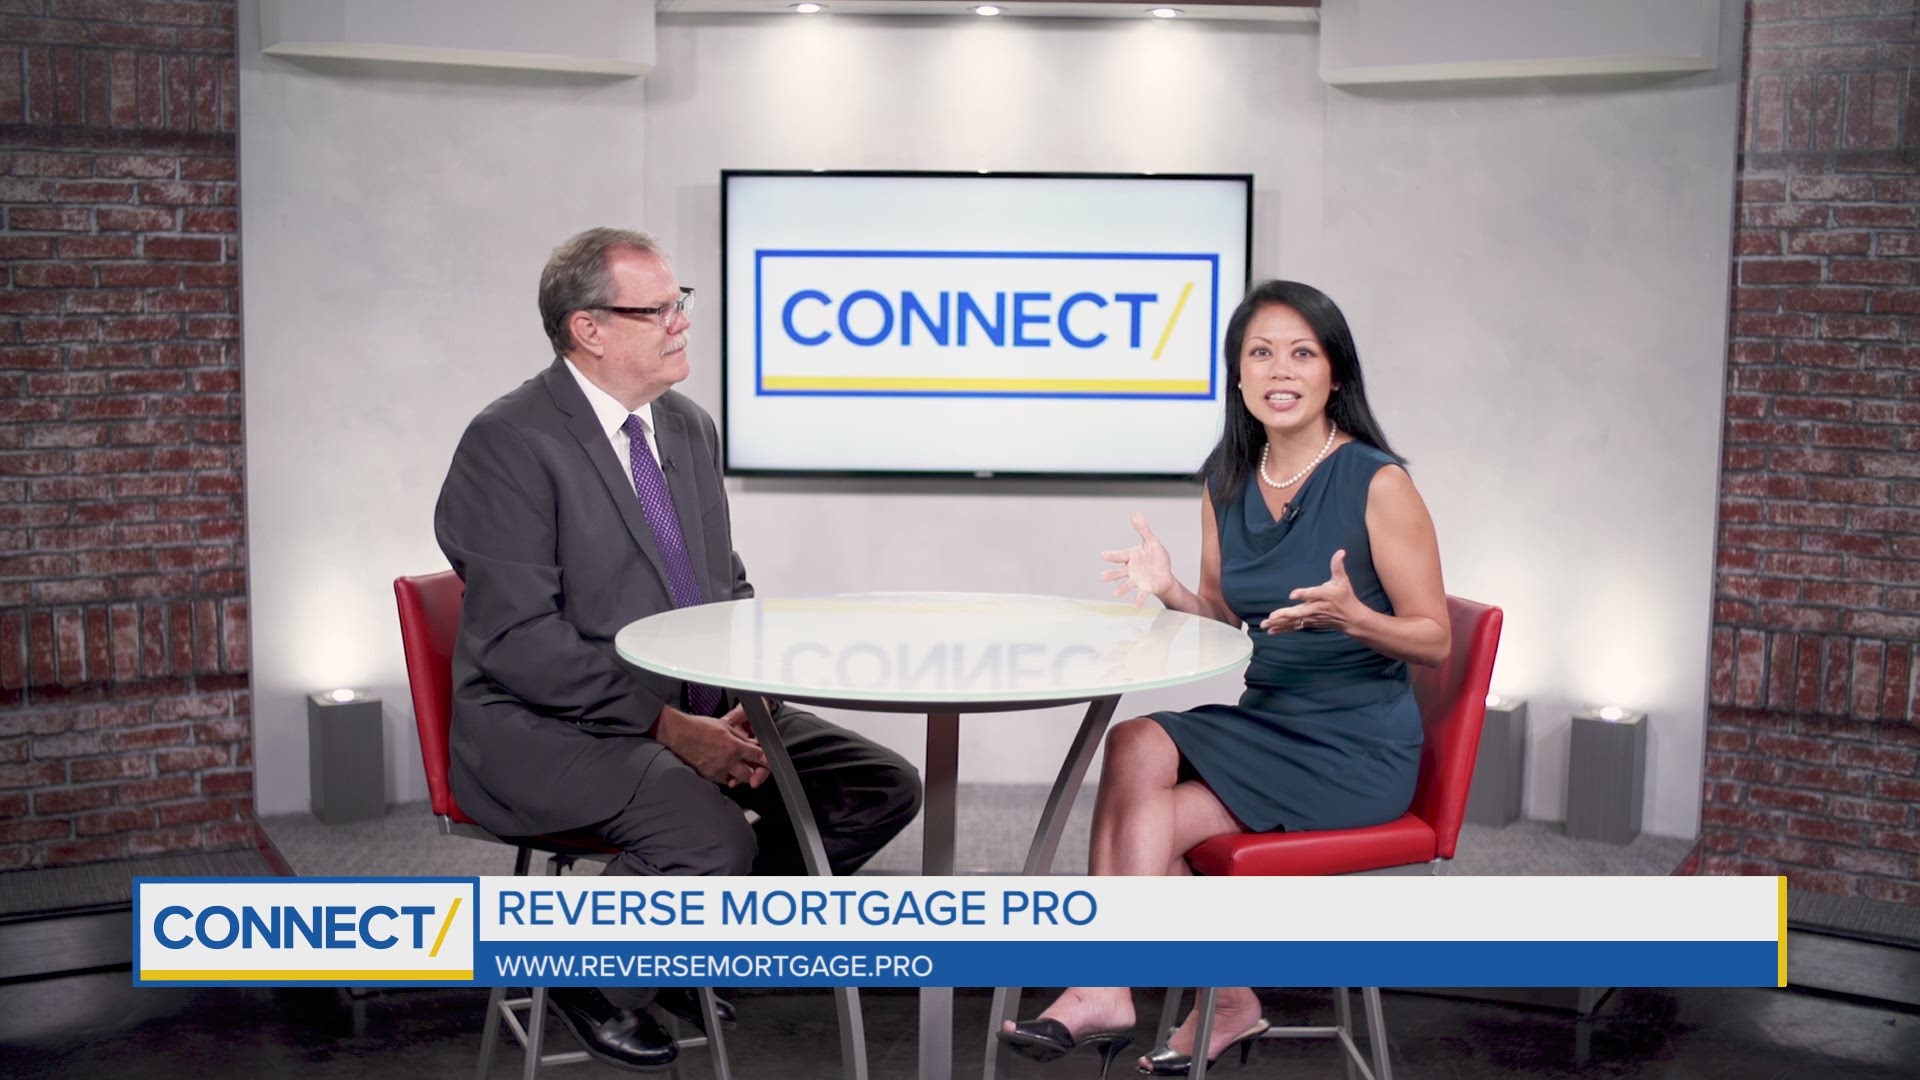 Reverse Mortgage Pro also provides senior financing services, and they make house calls!